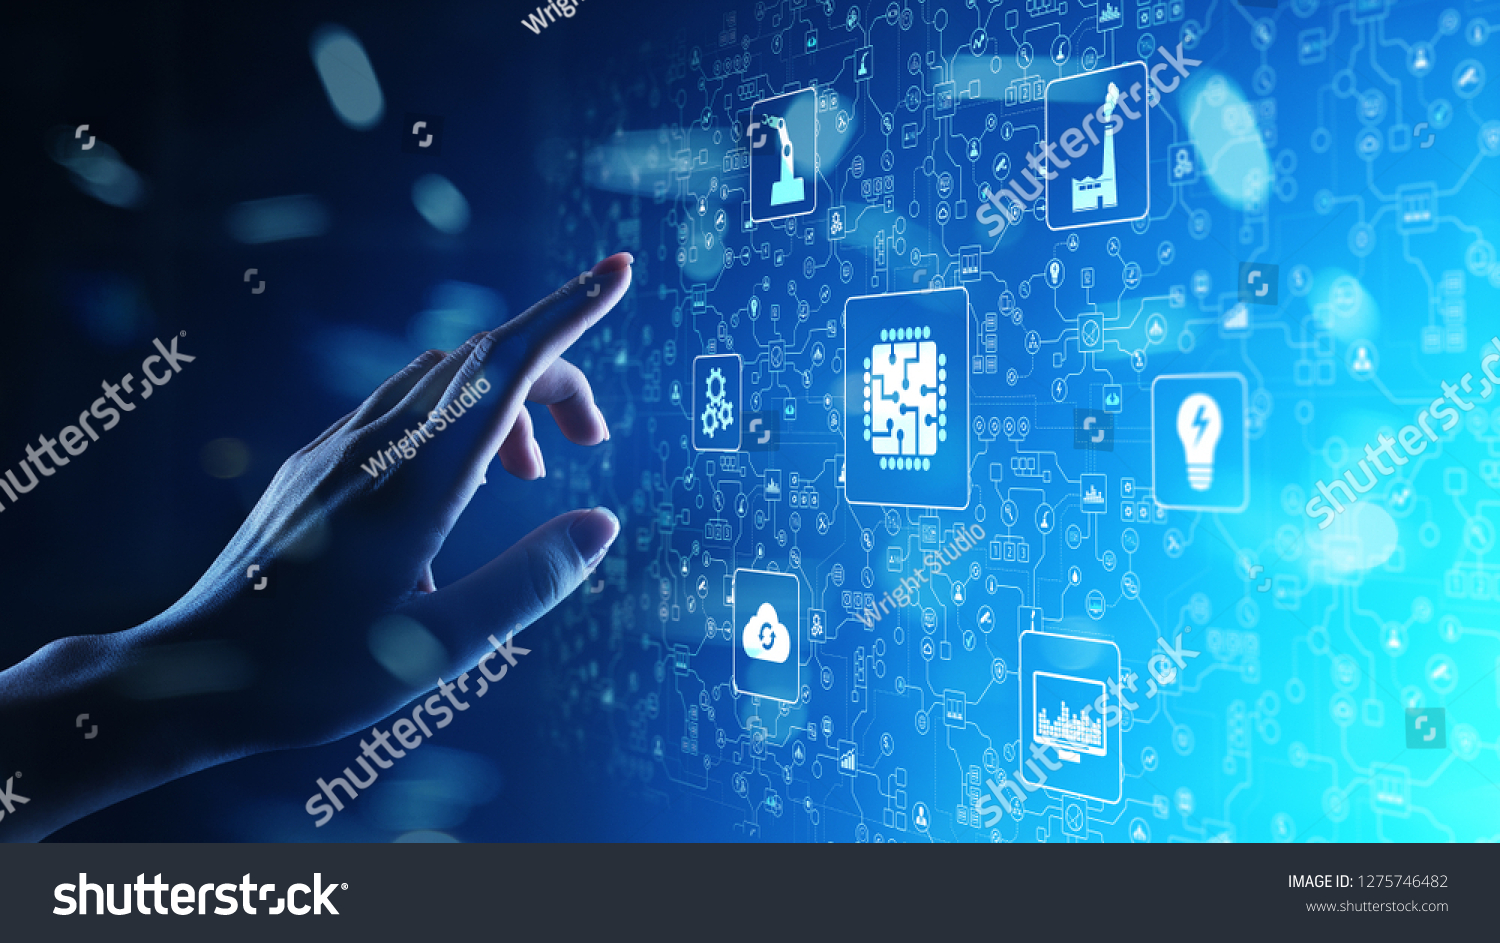 https://www.techneplus.com/wp-content/uploads/2023/01/stock-photo-microchip-artificial-intelligence-automation-and-internet-of-things-iot-digital-integration-1275746482.jpg